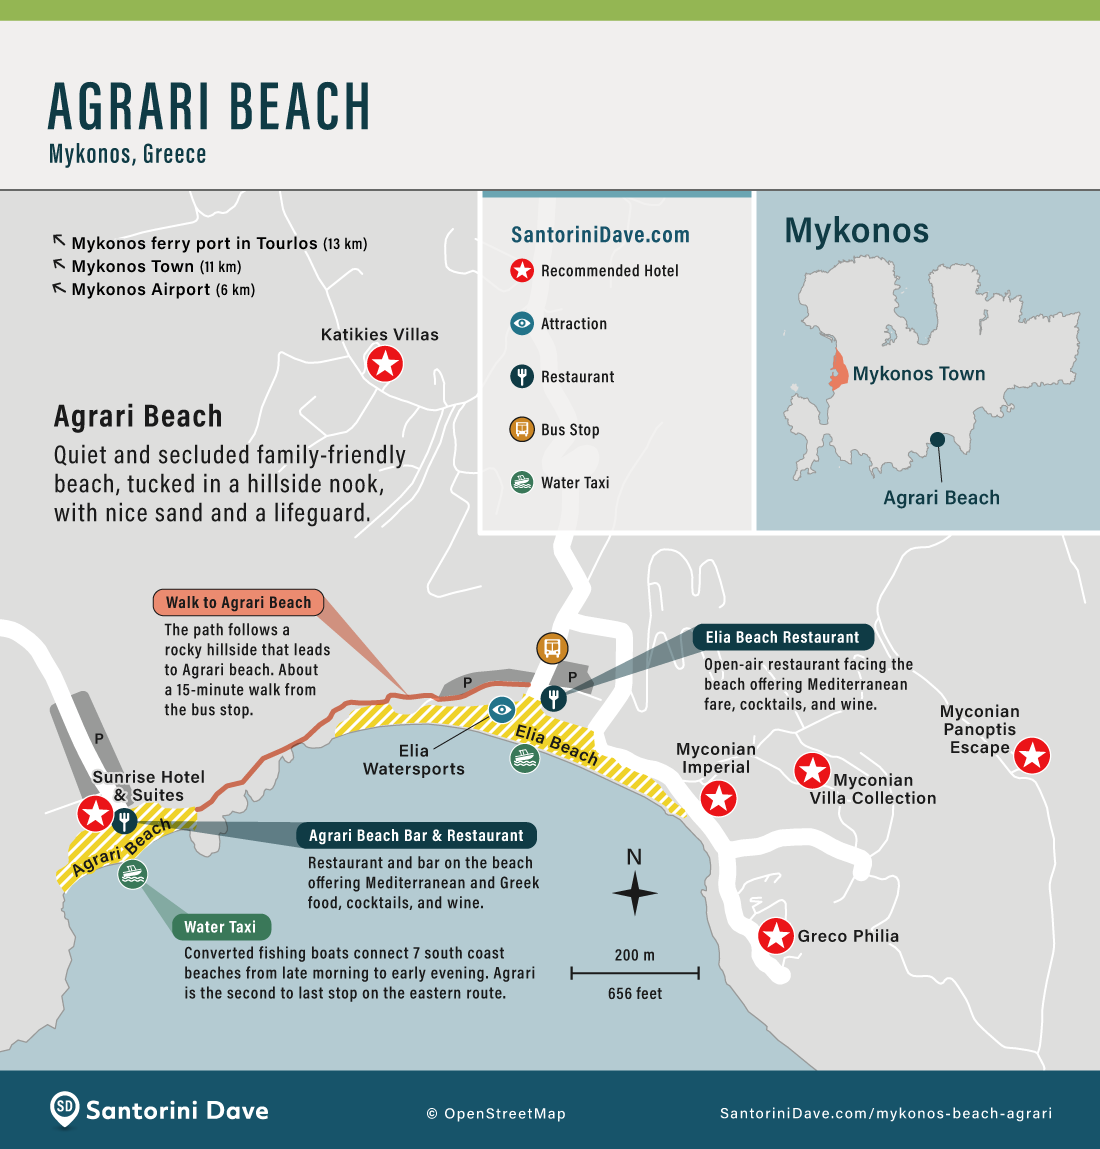 Map showing the hotels and amenities at Agrari Beach in Mykonos, as well as those at nearby Elia Beach